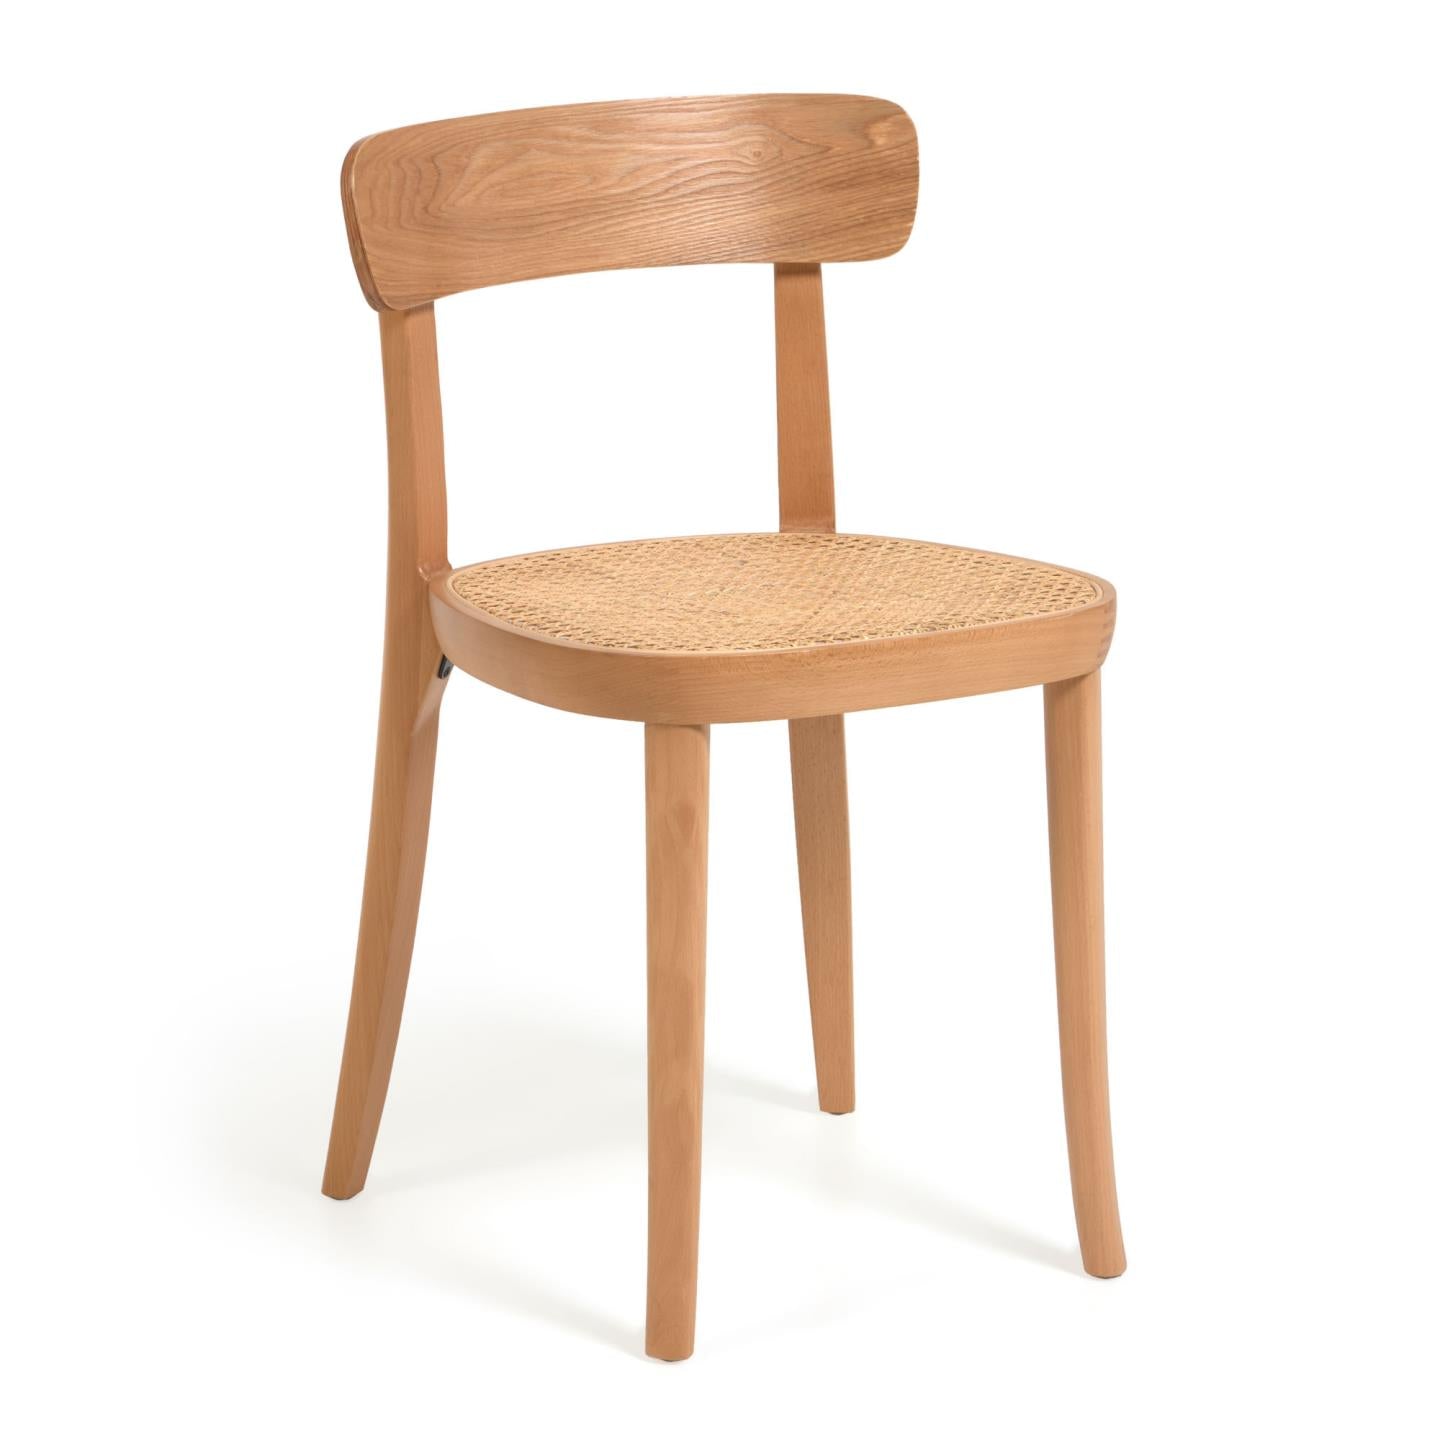 Romane chair in solid beech with natural finish, ash veneer and rattan